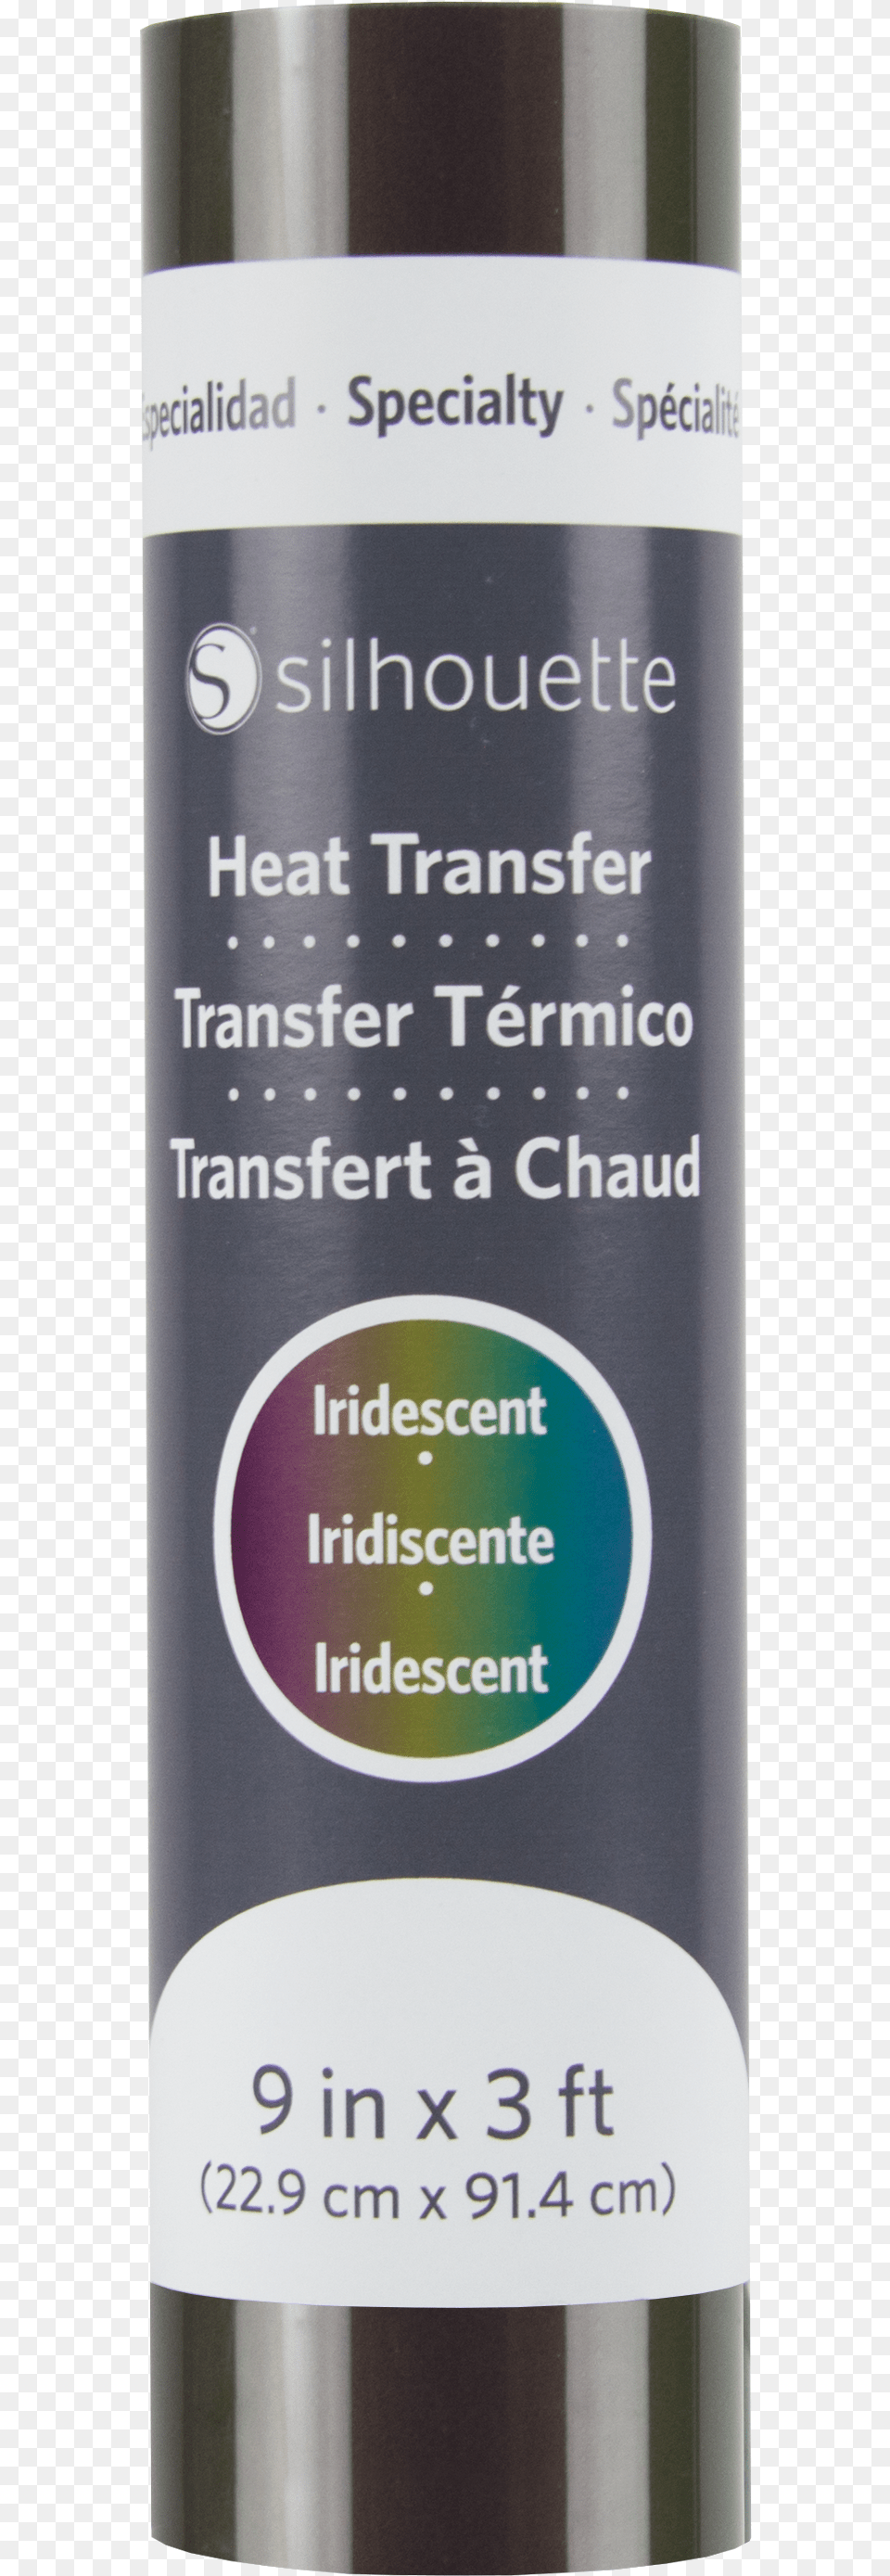 Iridescent Heat Transfer Silhouette Material Silhouette Iridescent Heat Transfer, Bottle, Cosmetics Free Transparent Png